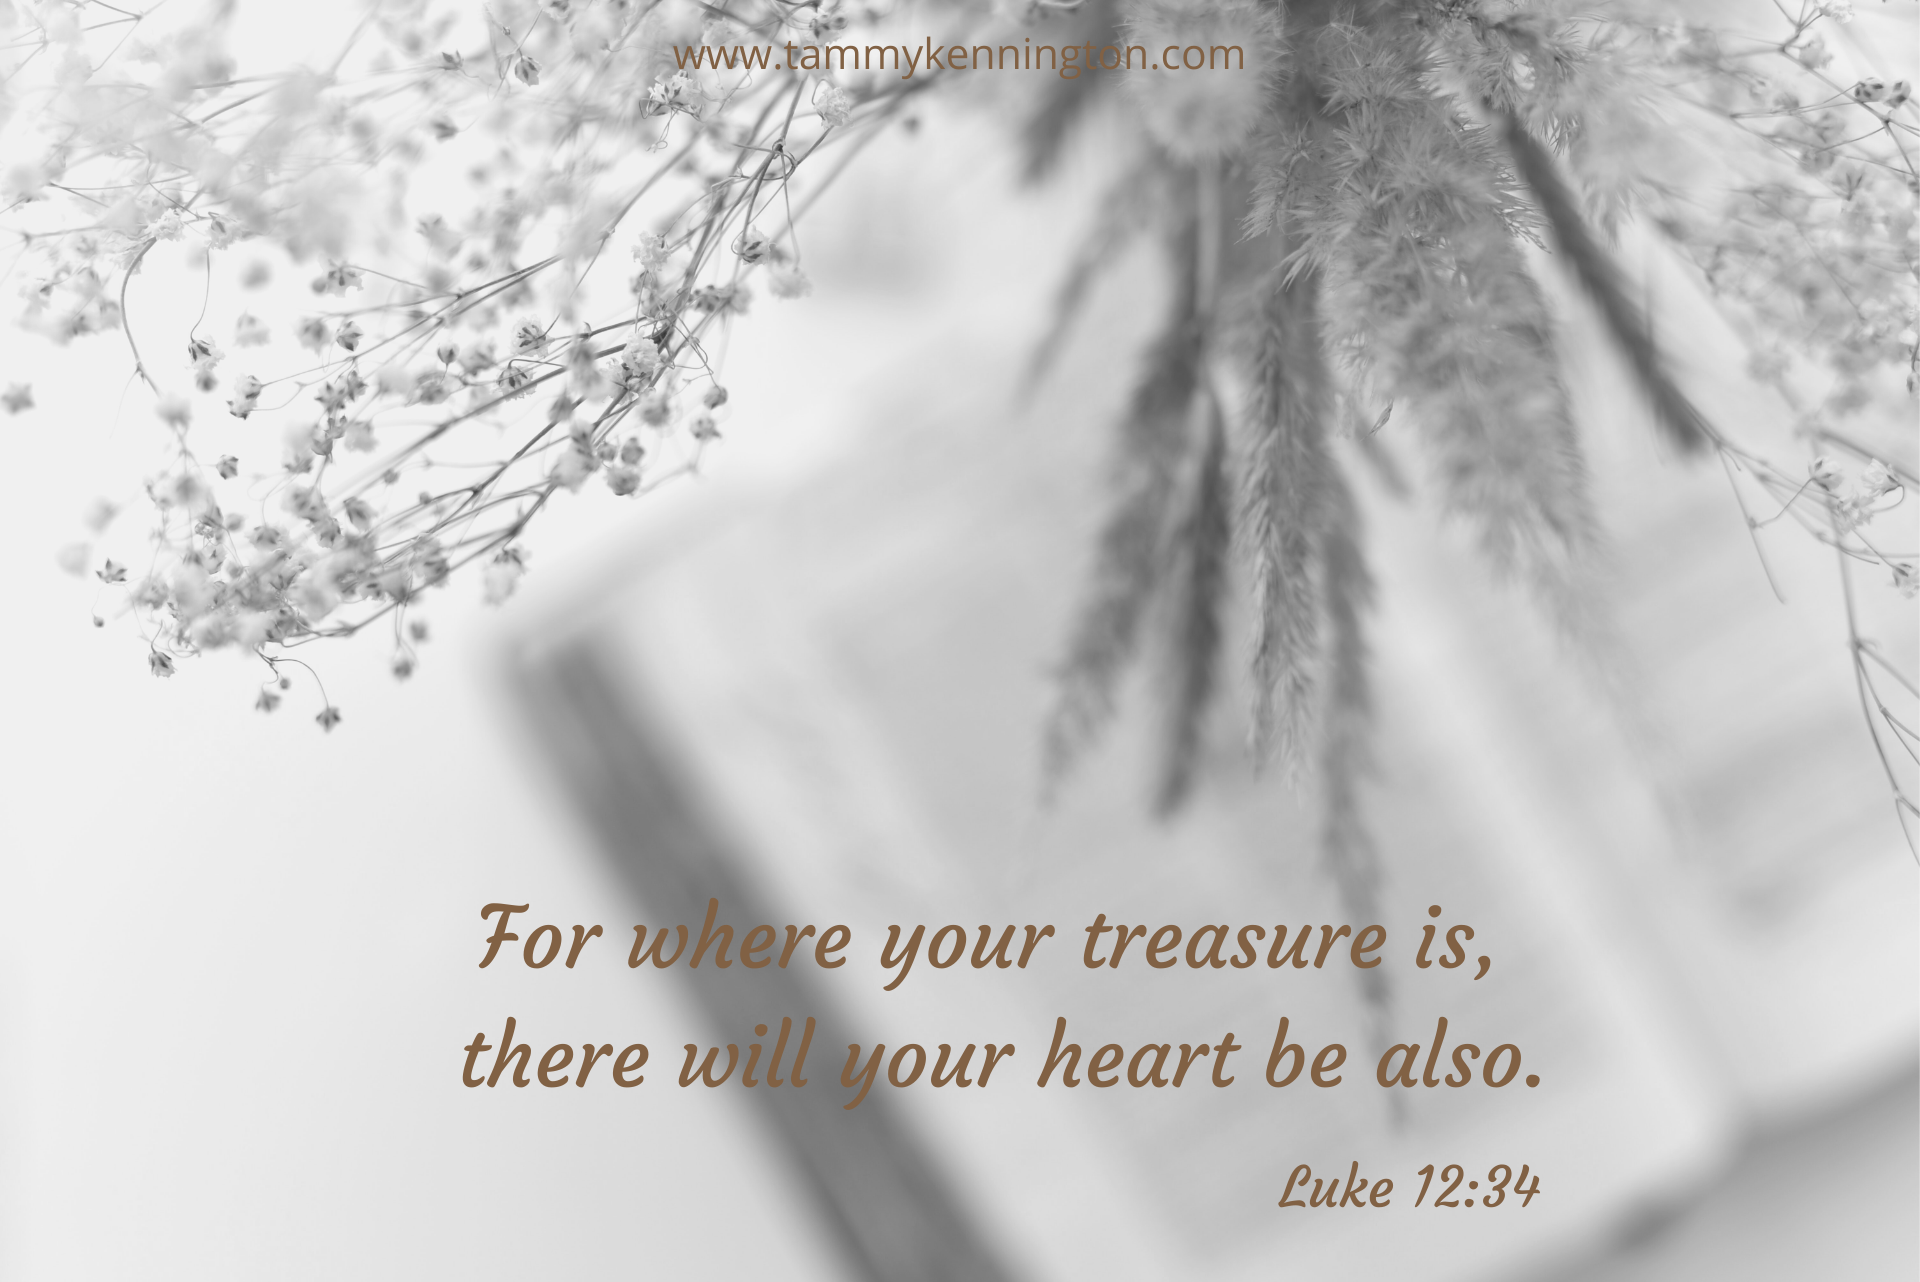 For where your treasure is, there will your heart be also.